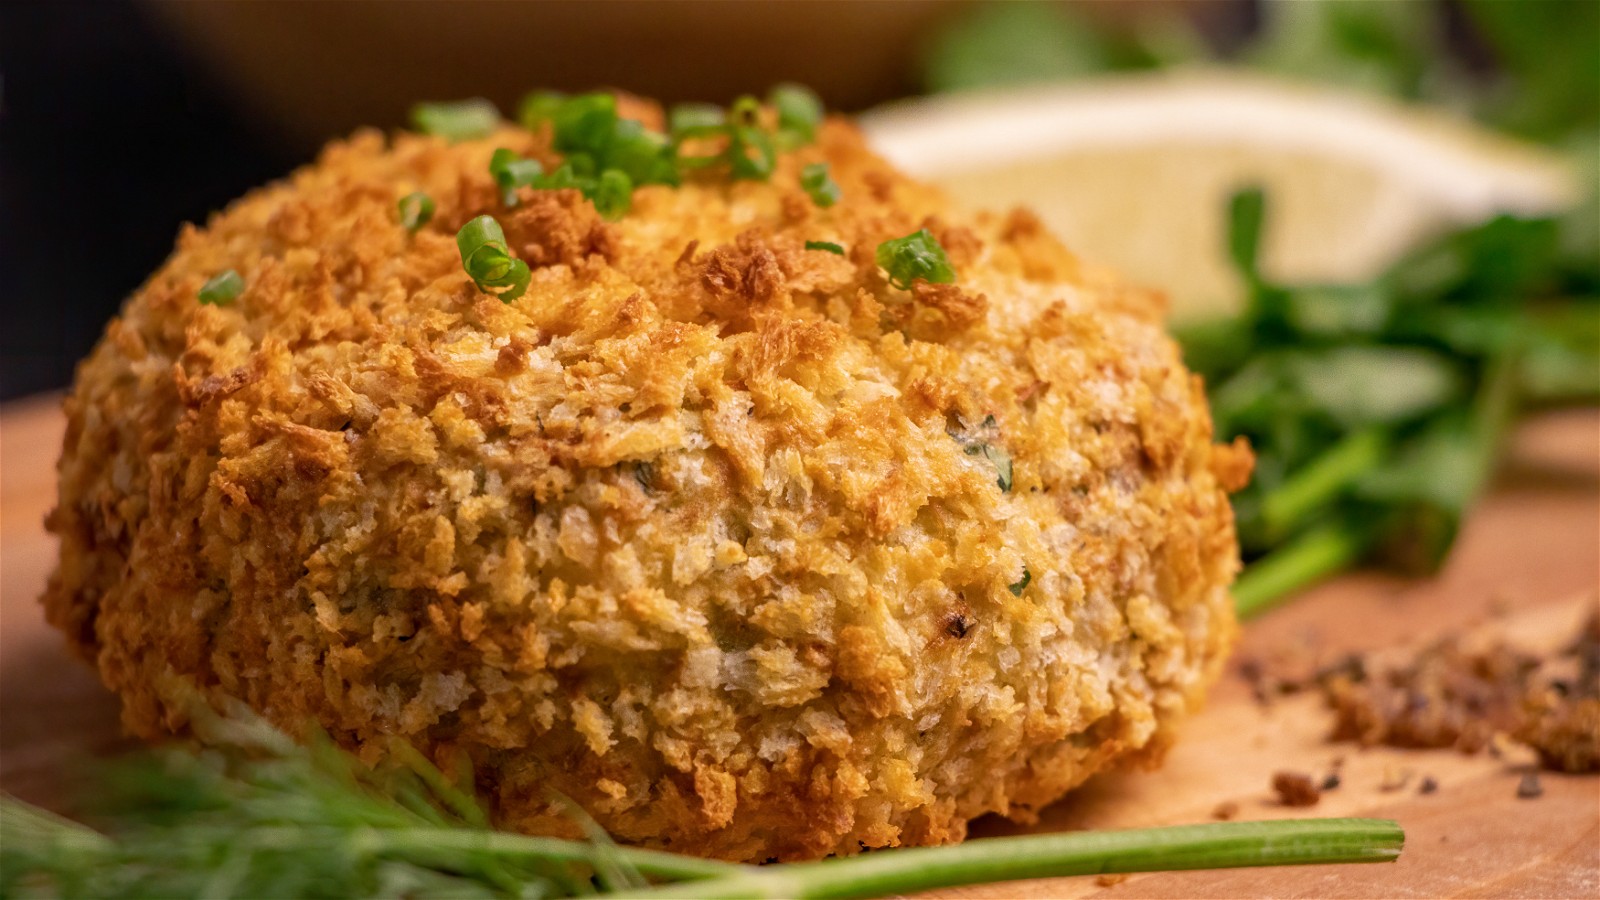 Image of Crab cakes of The Warrior with bacon pepper